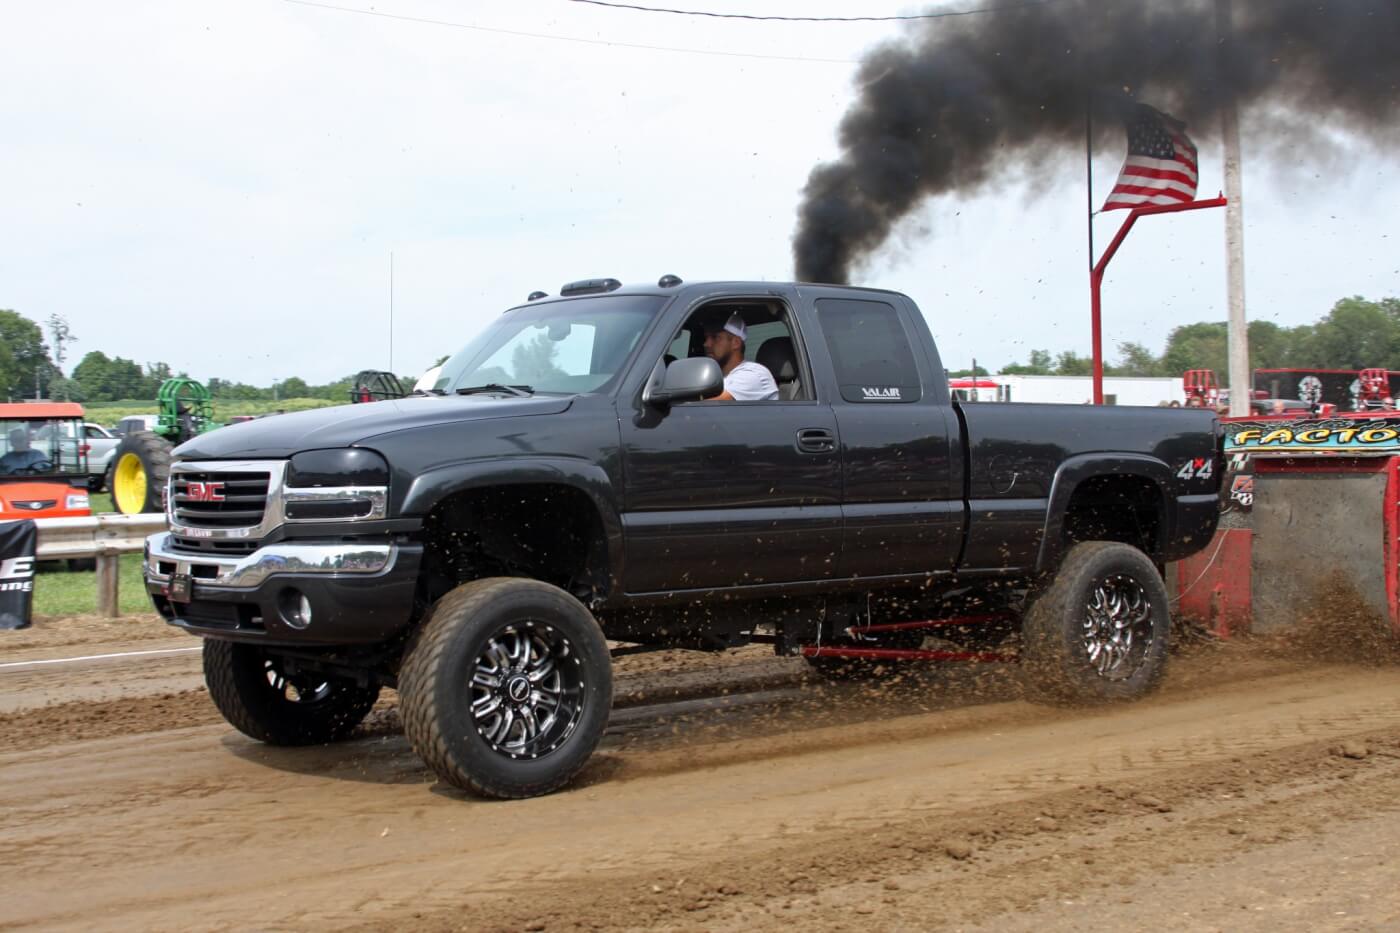 Charles Chesuk’s GMC looked great as it blasted down the track during his exhibition hook.